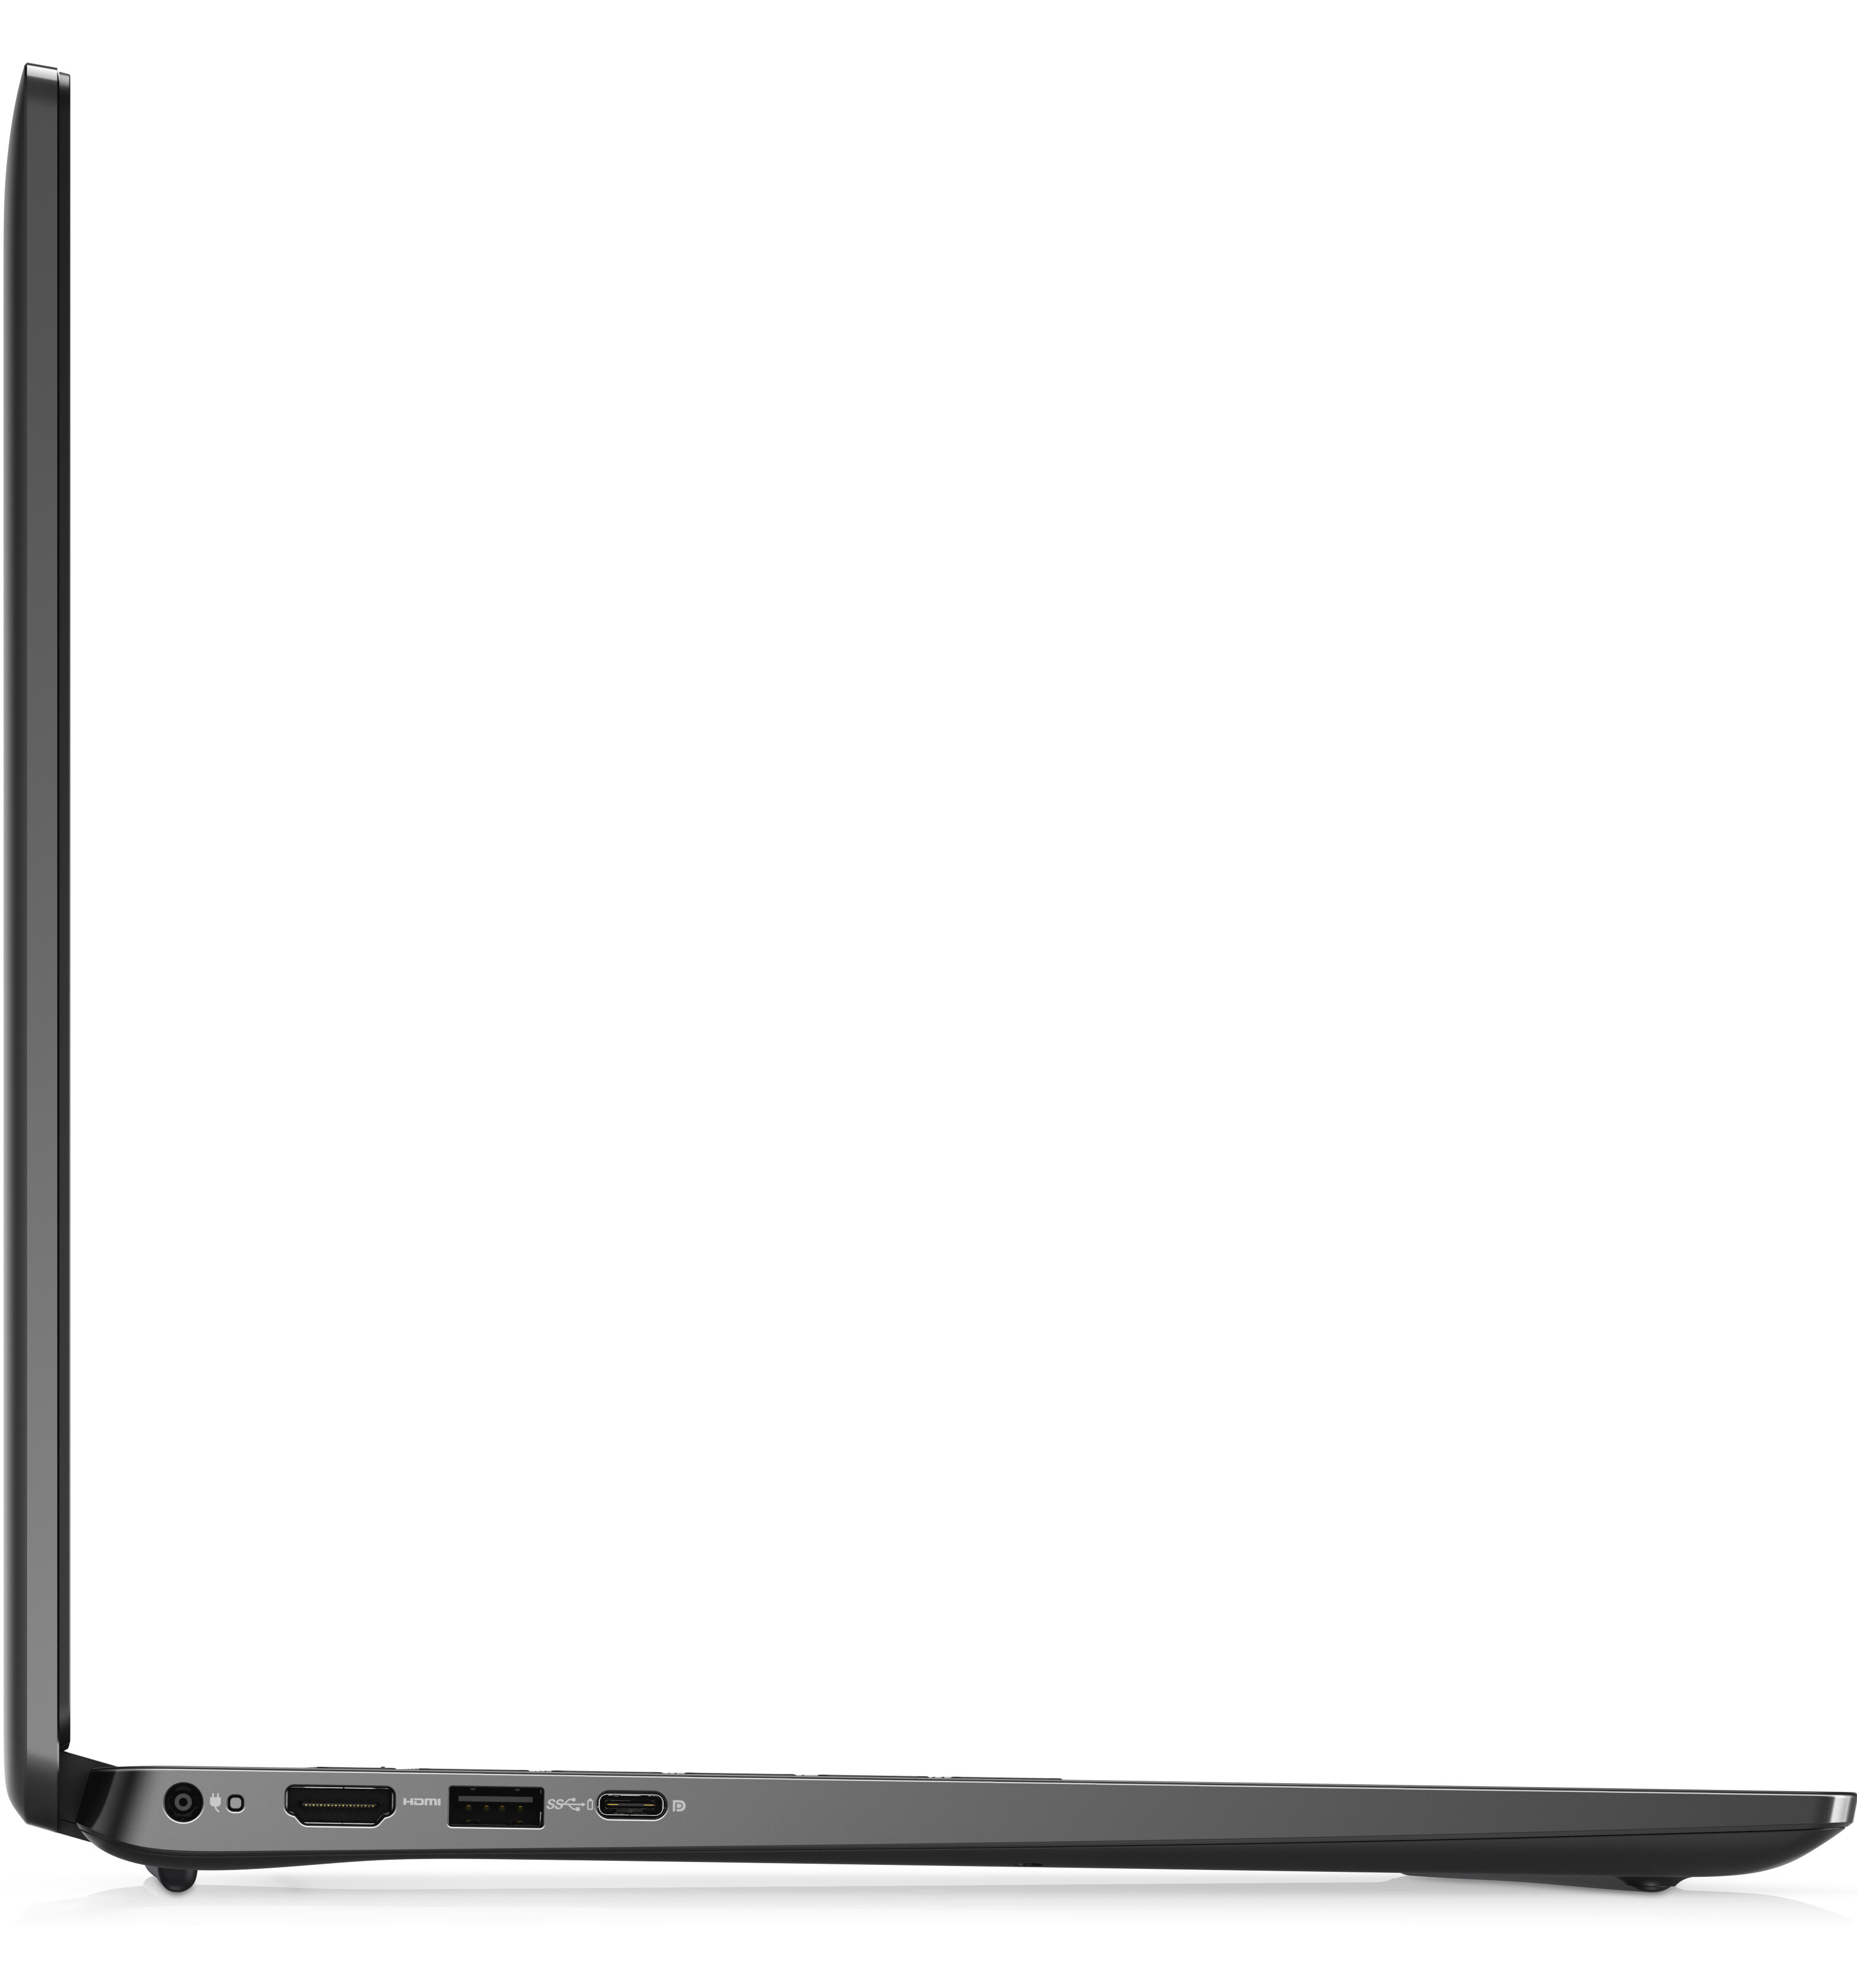 Latitude 15-inch 3520 Business Laptop with Video Conferencing